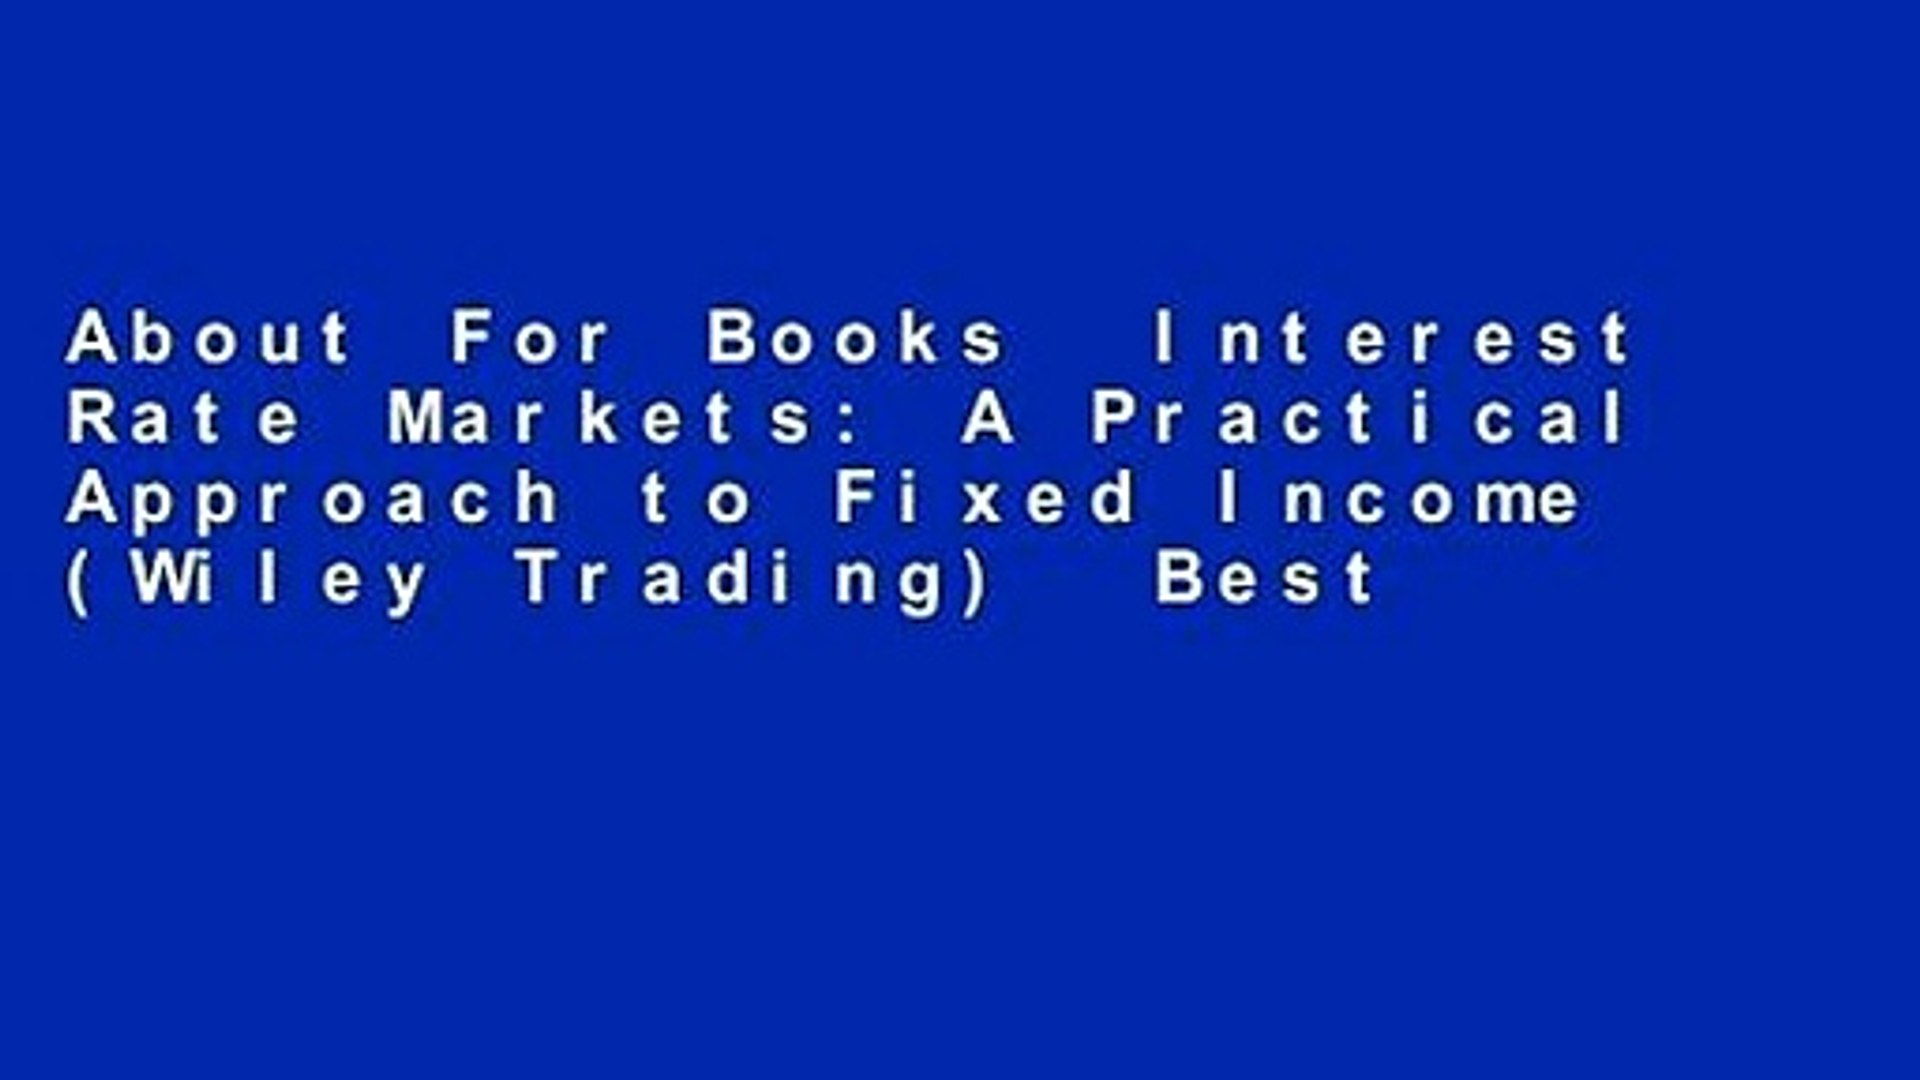 About For Books Interest Rate Markets: A Practical Approach to Fixed Income  (Wiley Trading) Best - video dailymotion